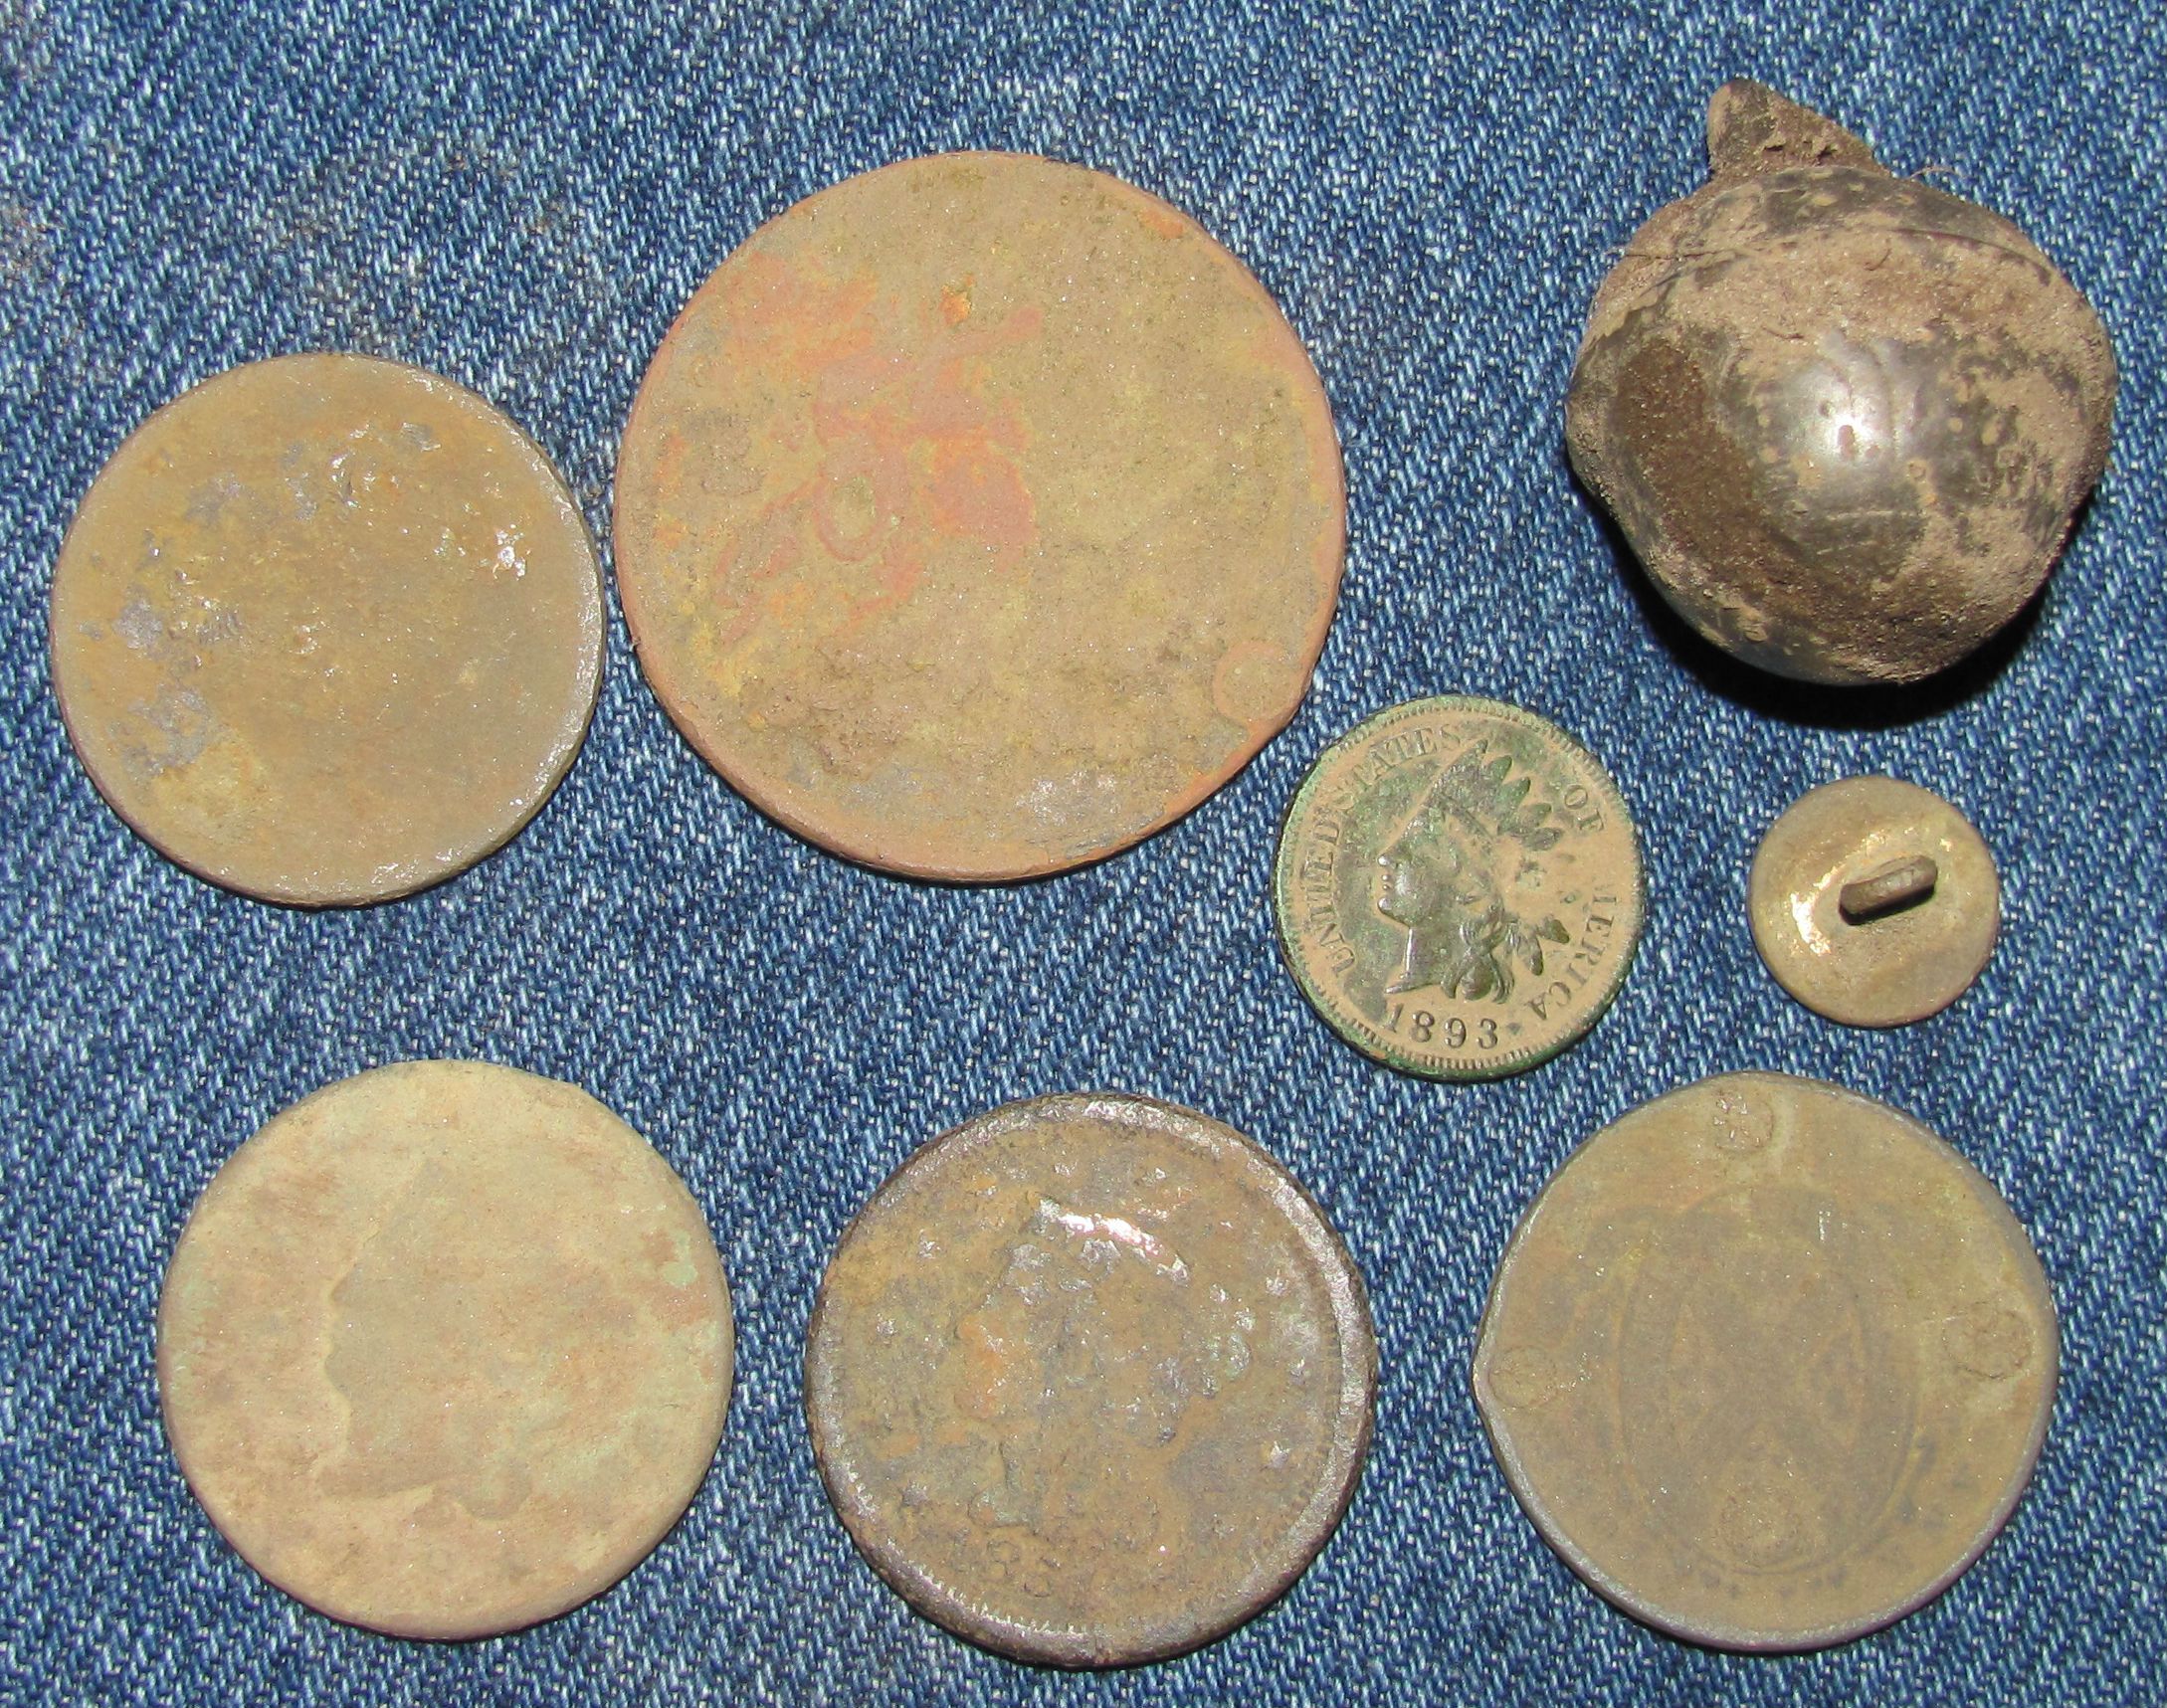 Three LC's, Russian kopek, indian head cent, canadian bank token, small flat button and a croto bell.
Oct.2012